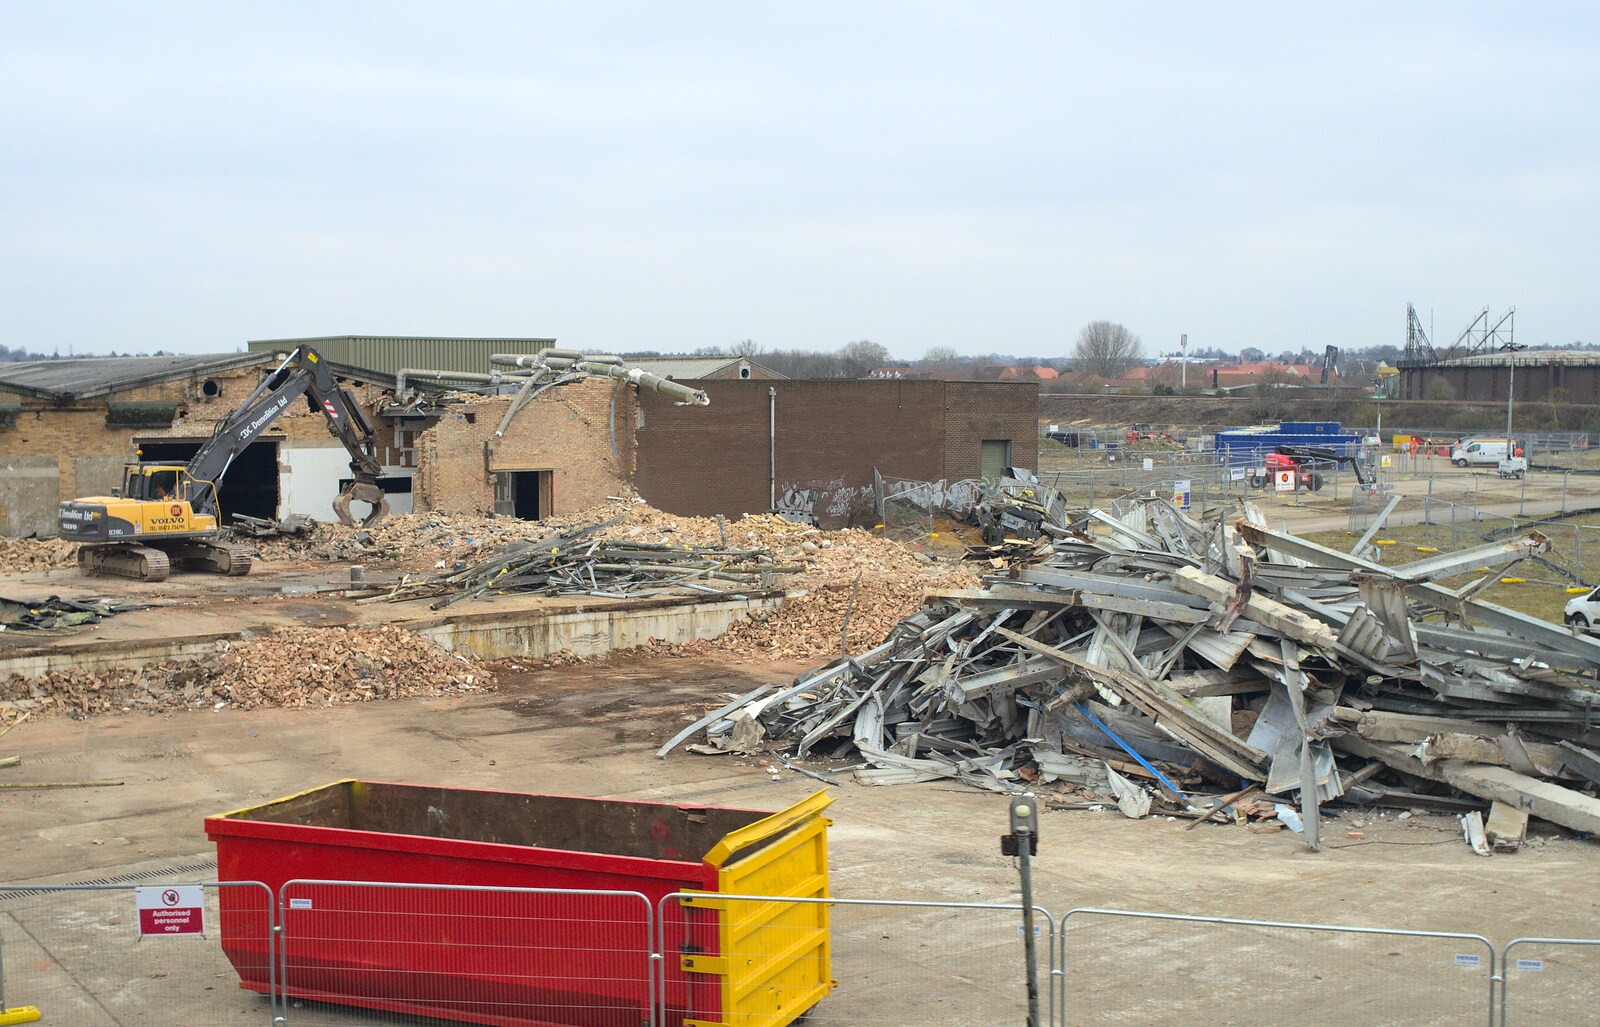 Another large pile of tangled metal from The Demolition of the Bacon Factory, Ipswich, Suffolk - 20th February 2013